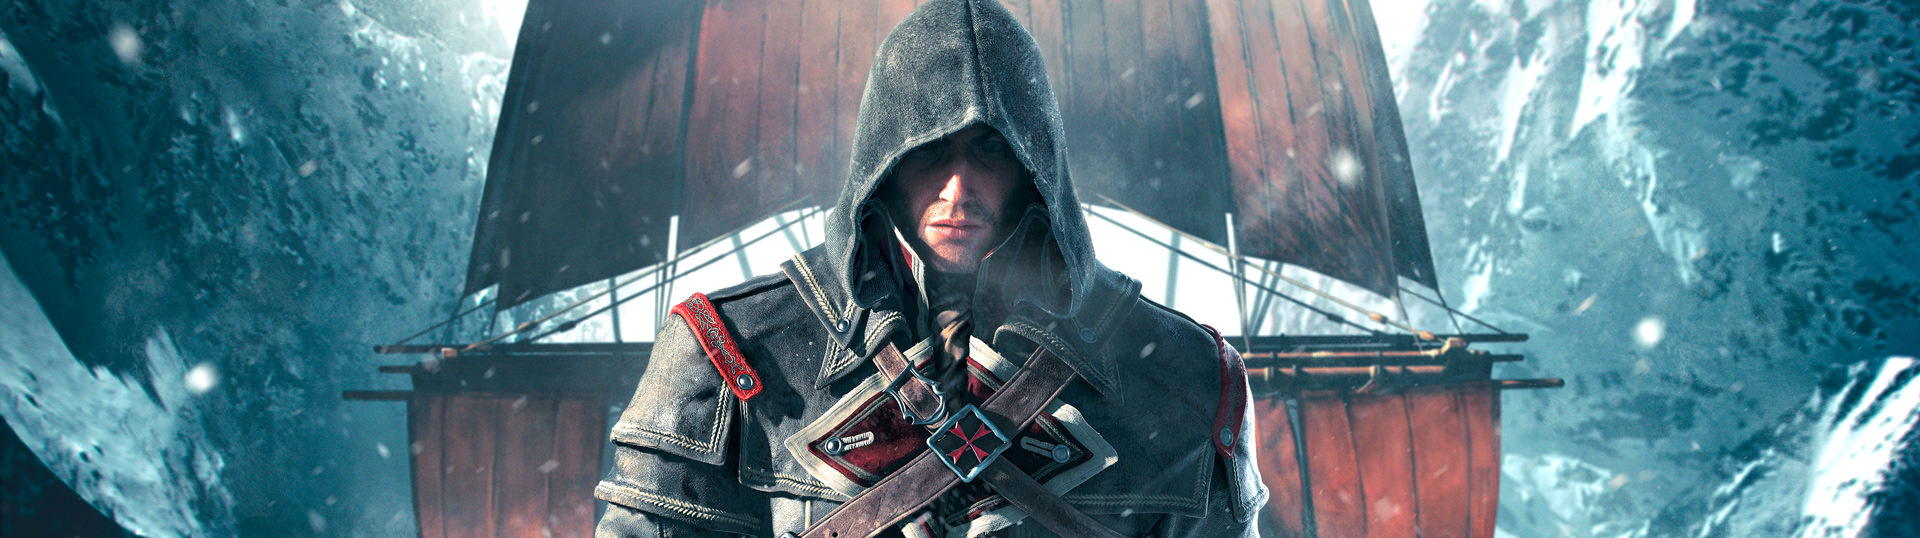 Assassin's Creed Rogue at the best price